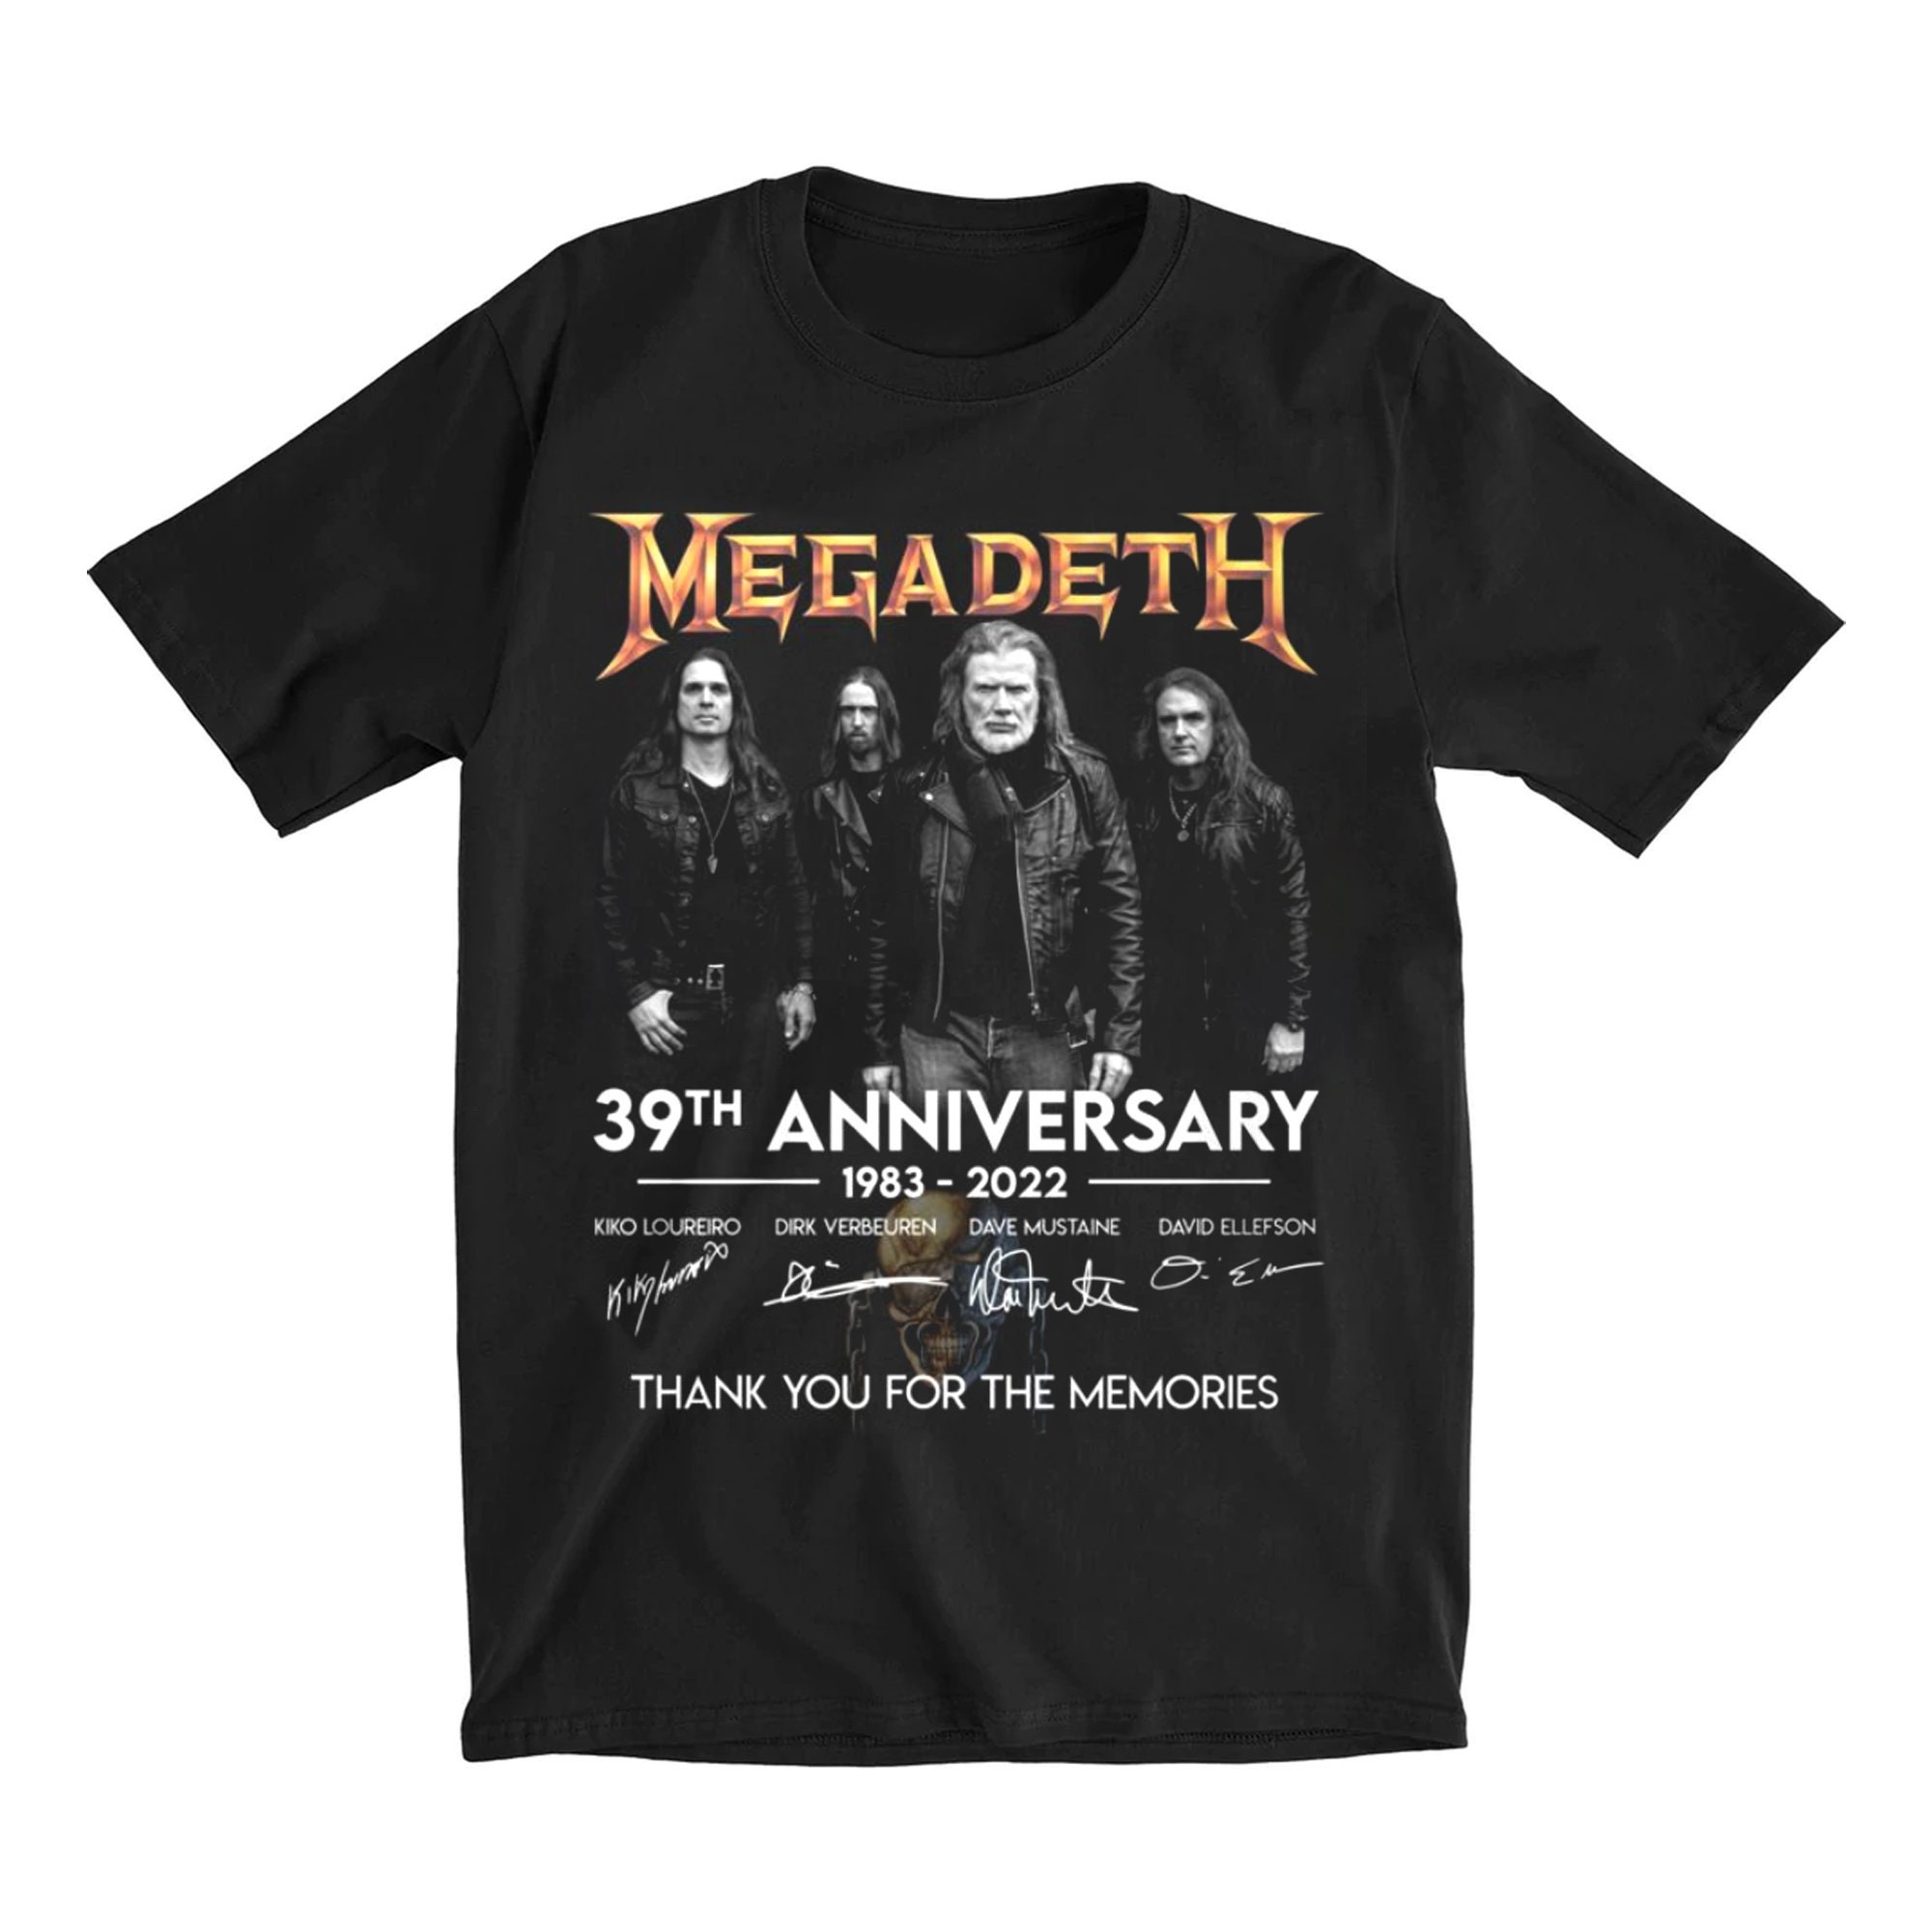 Megadeth Of 40th Anniversary 1983 2022 Signatures Thank You For The Memories Unisex T-Shirt